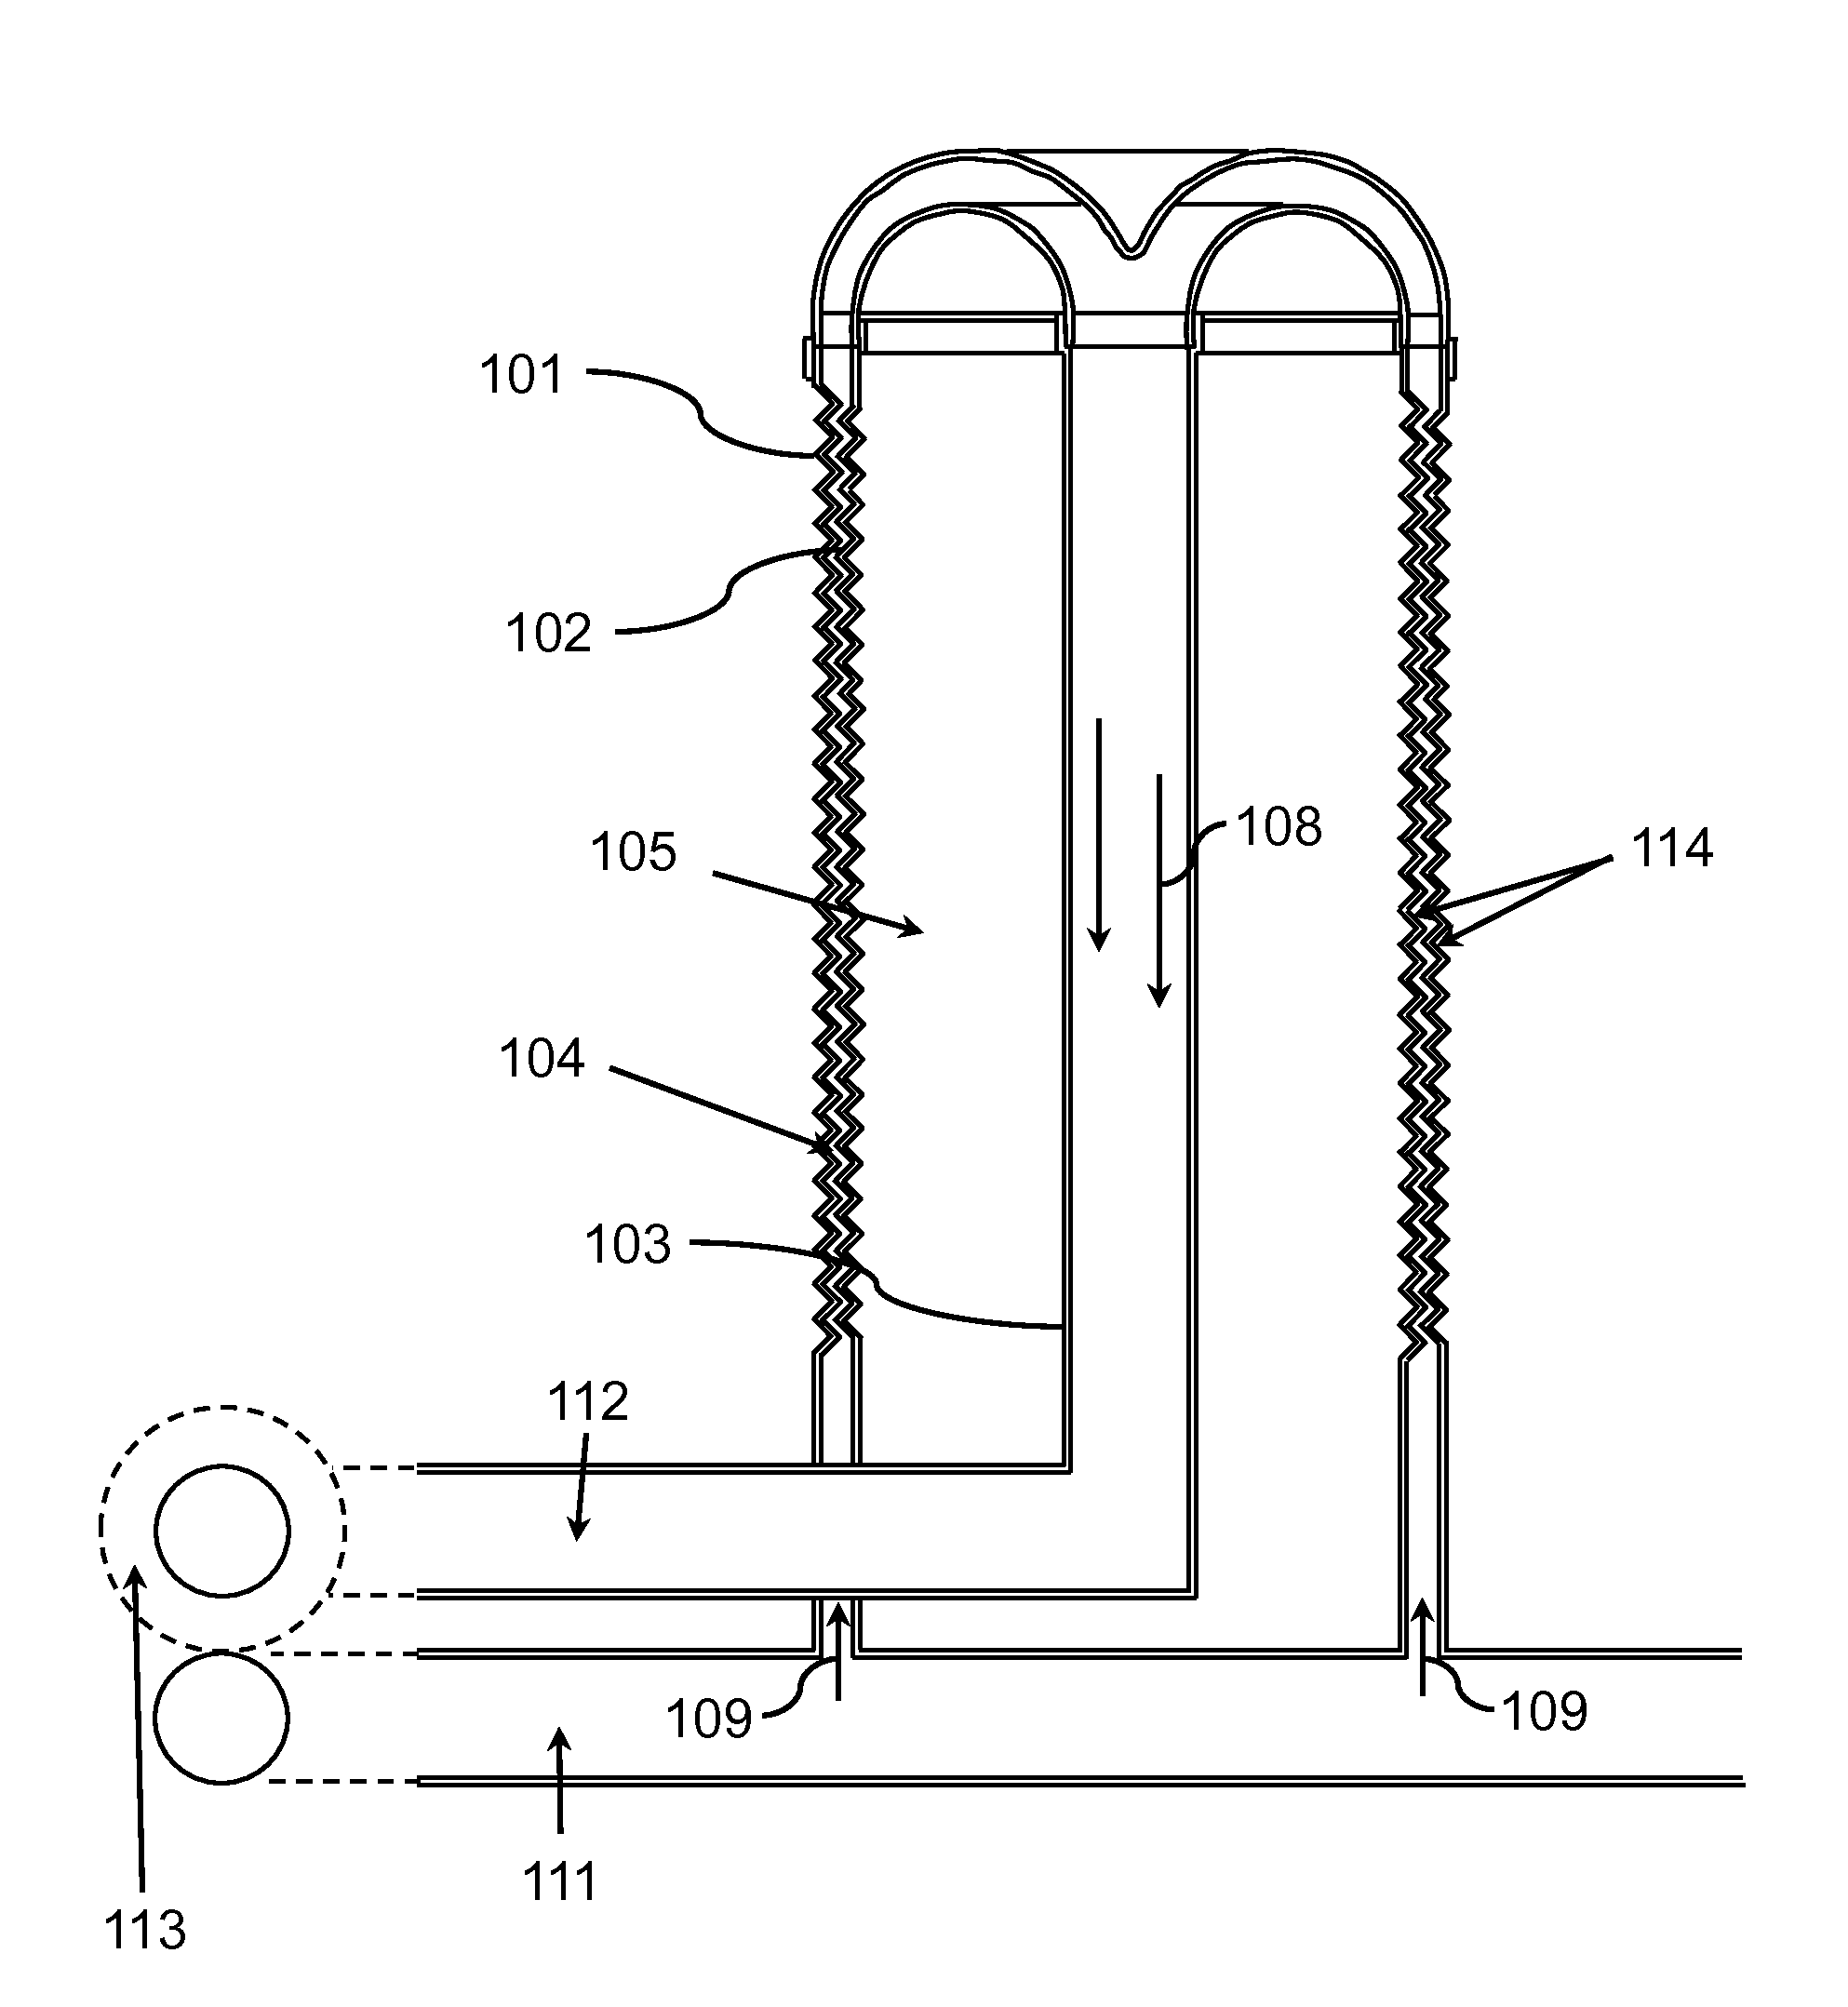 Solar thermal receiver with concentric tube modules